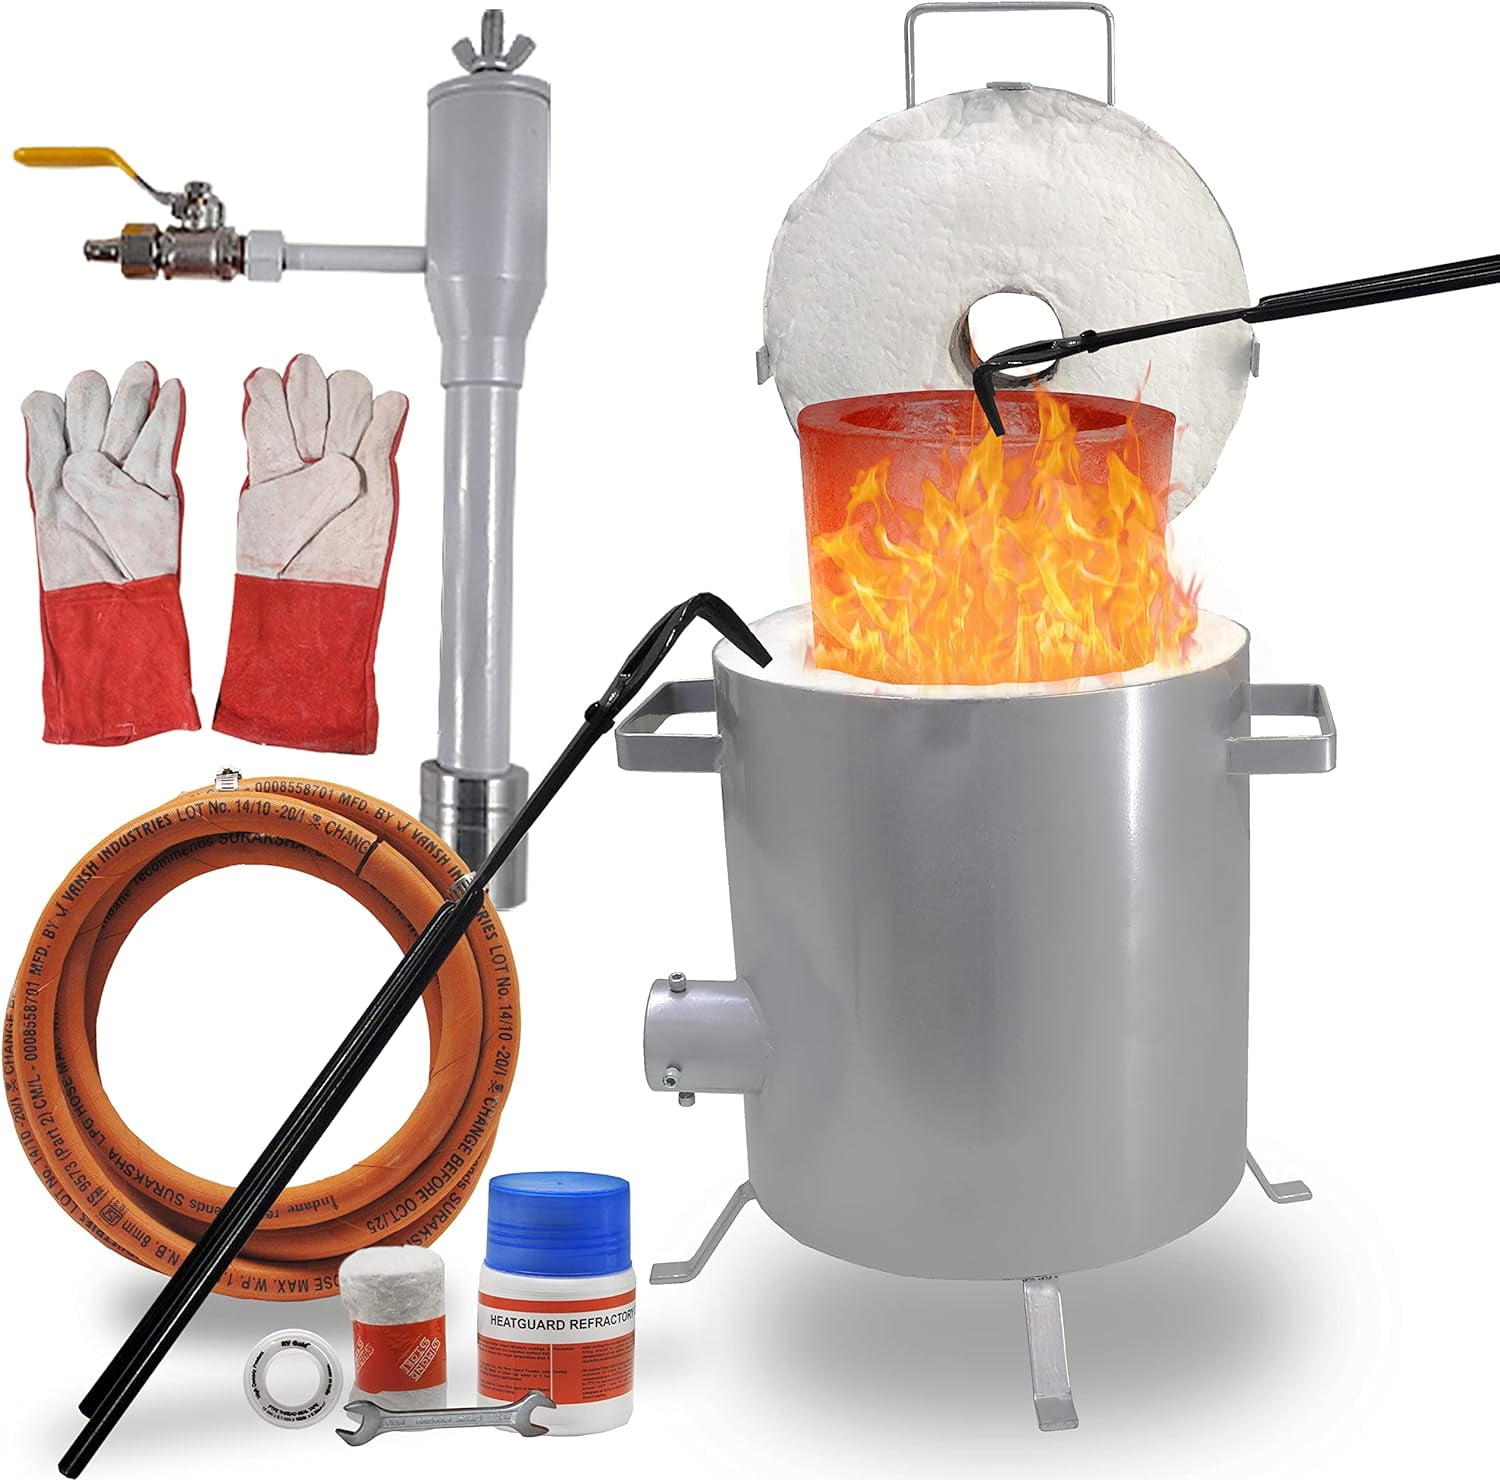 ANUU Gold Melting Furnace Deluxe Kit with Crucible and Tongs Kiln Refining  Jewelry Precious Metals Gold Silver Copper Aluminum Melting Casting